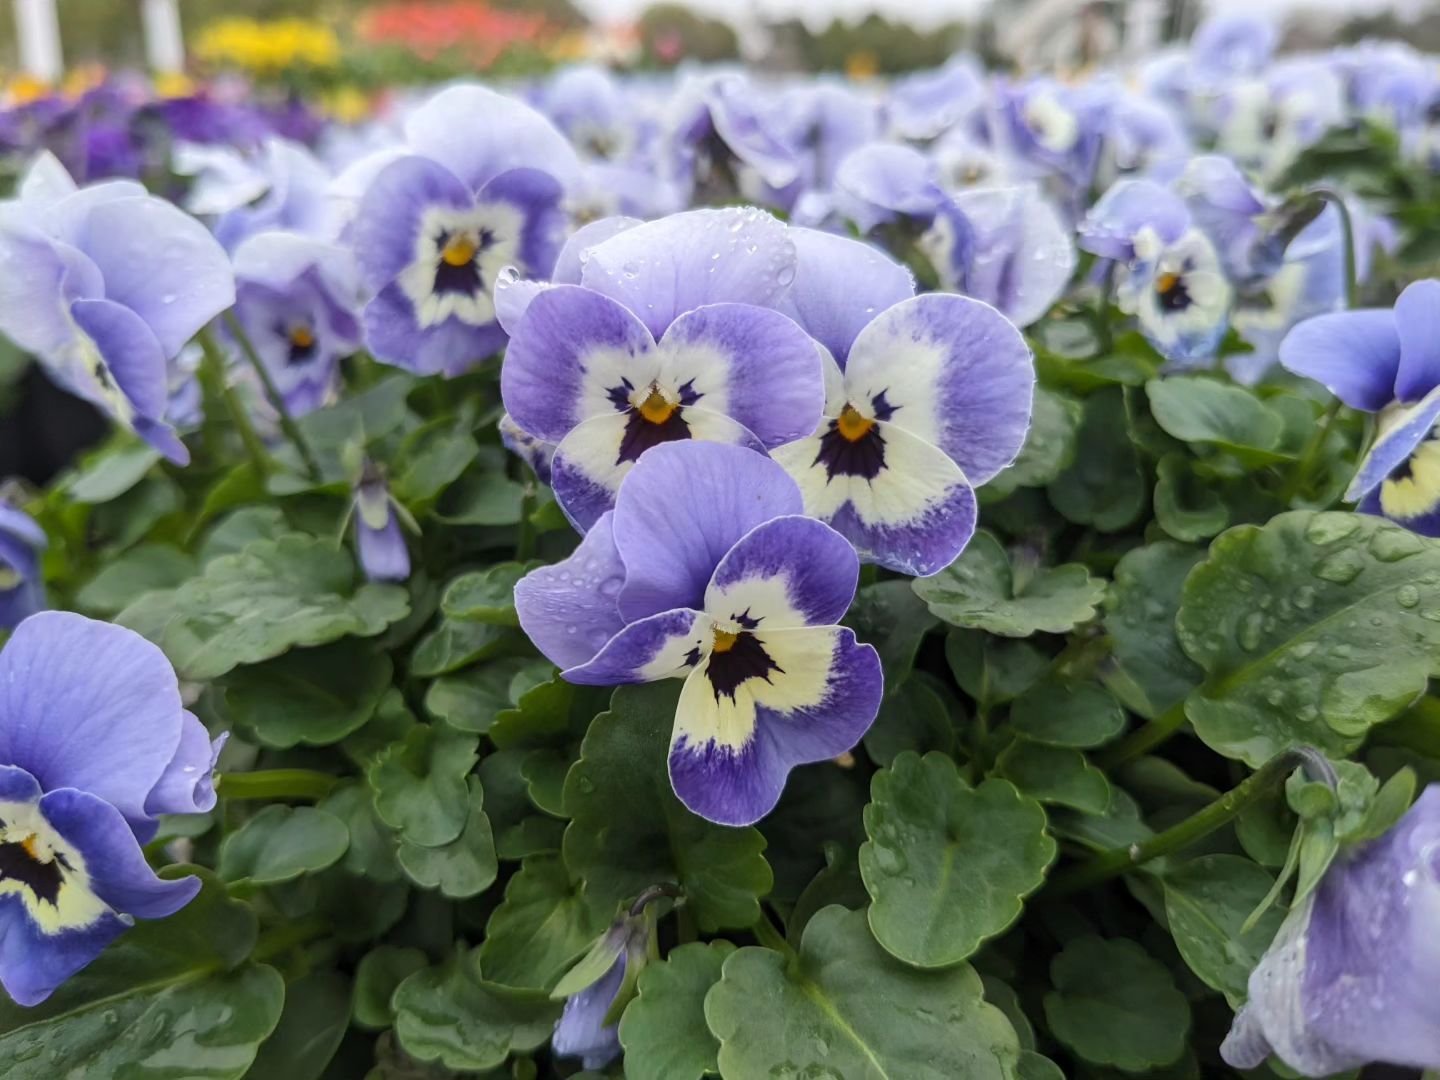 🎉 S A L E 🎉 Run!! All pansies + violas are 30% off and all spring bulbs are 50% off!!🏃&zwj;♀️ 

This was also a big week for plant deliveries! We now have, shrubs, organic herbs, cold crop veggies, new spring annuals, and lots of perennials!!😍🌸?